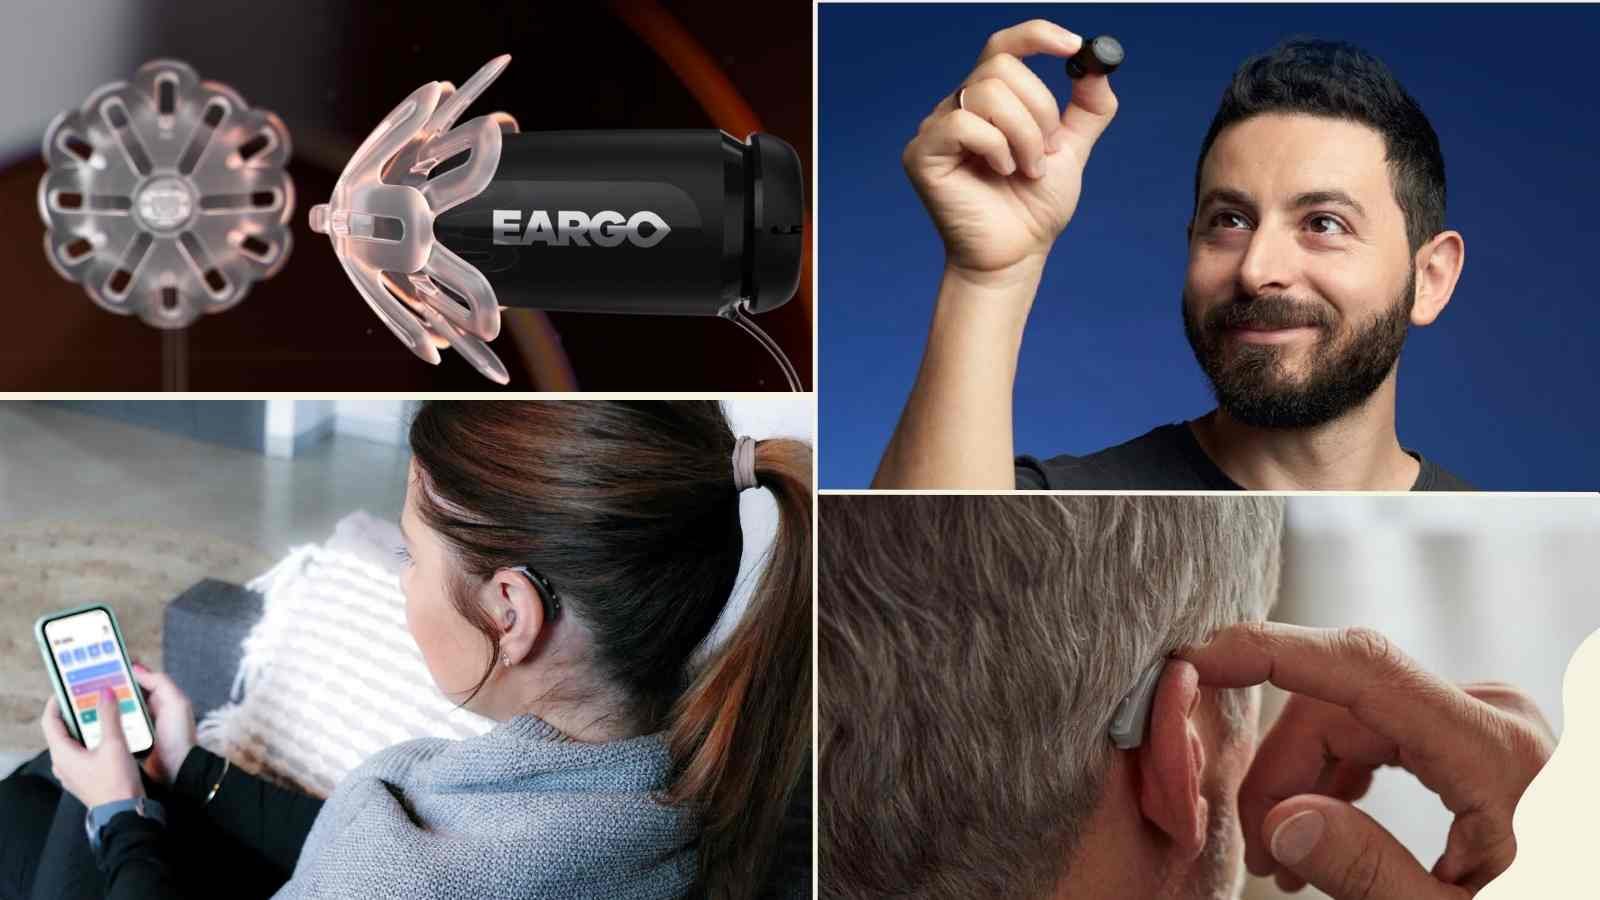 Images of various over-the-counter hearing aids